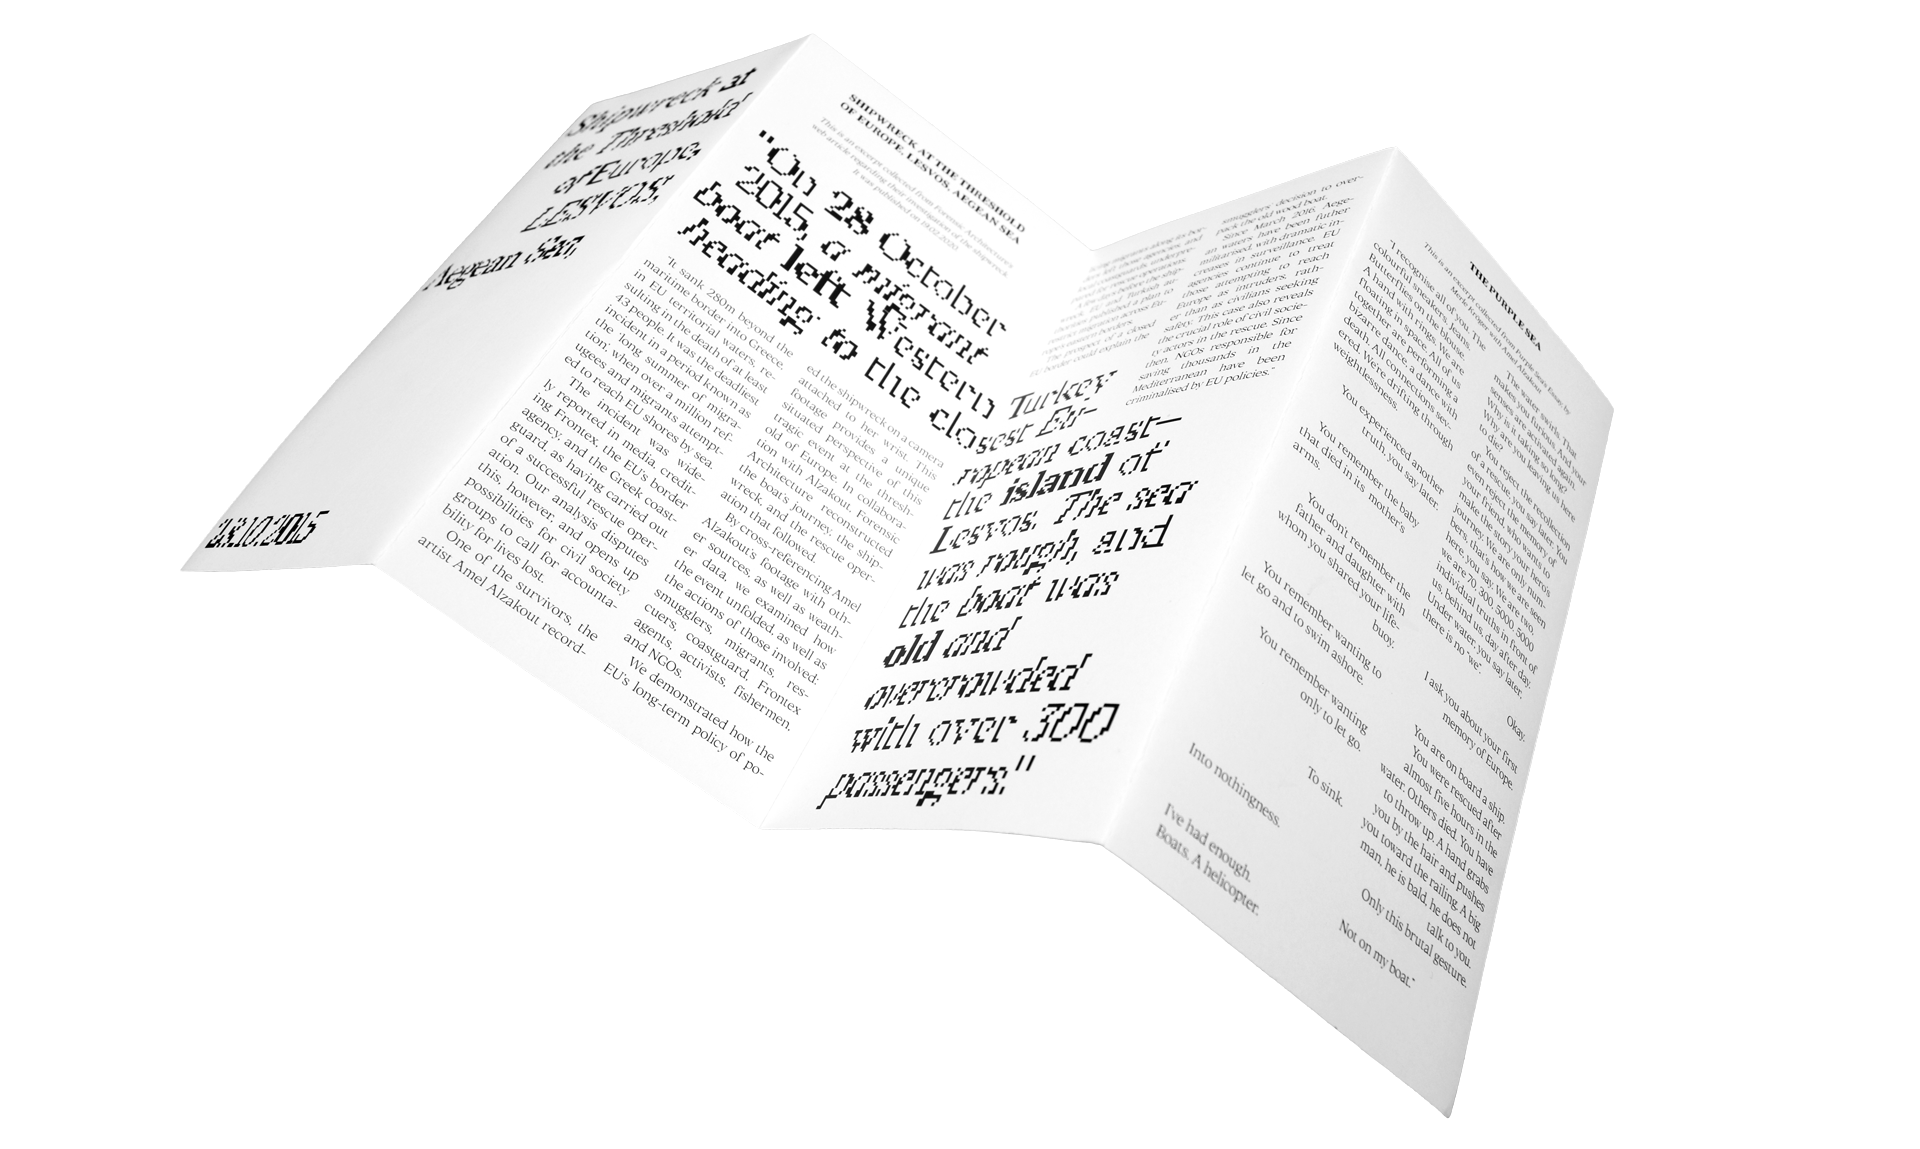 Support publication layout.